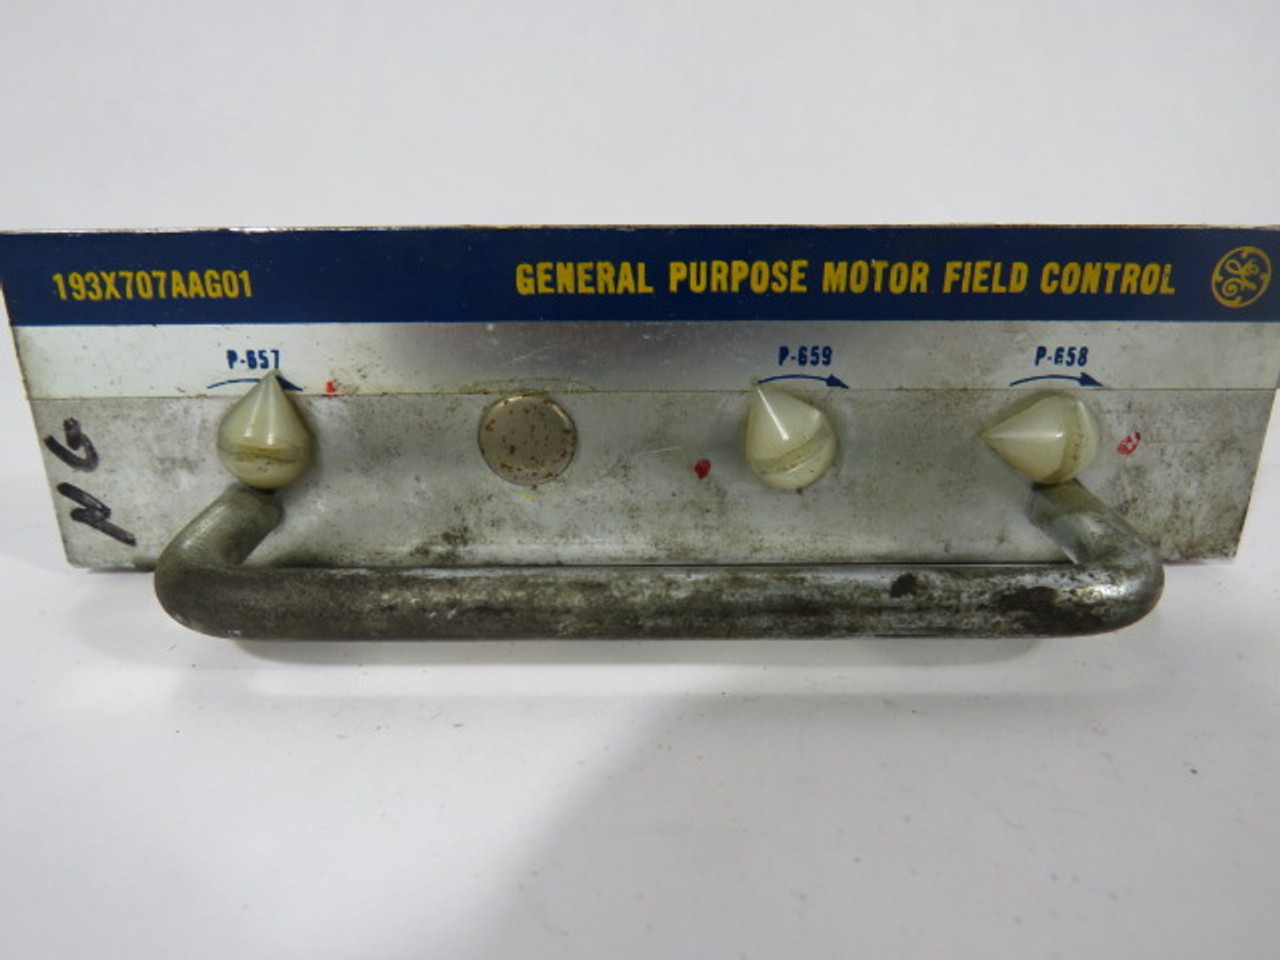 General Electric 193X-707AAG01 General Purpose Motor Field Control USED